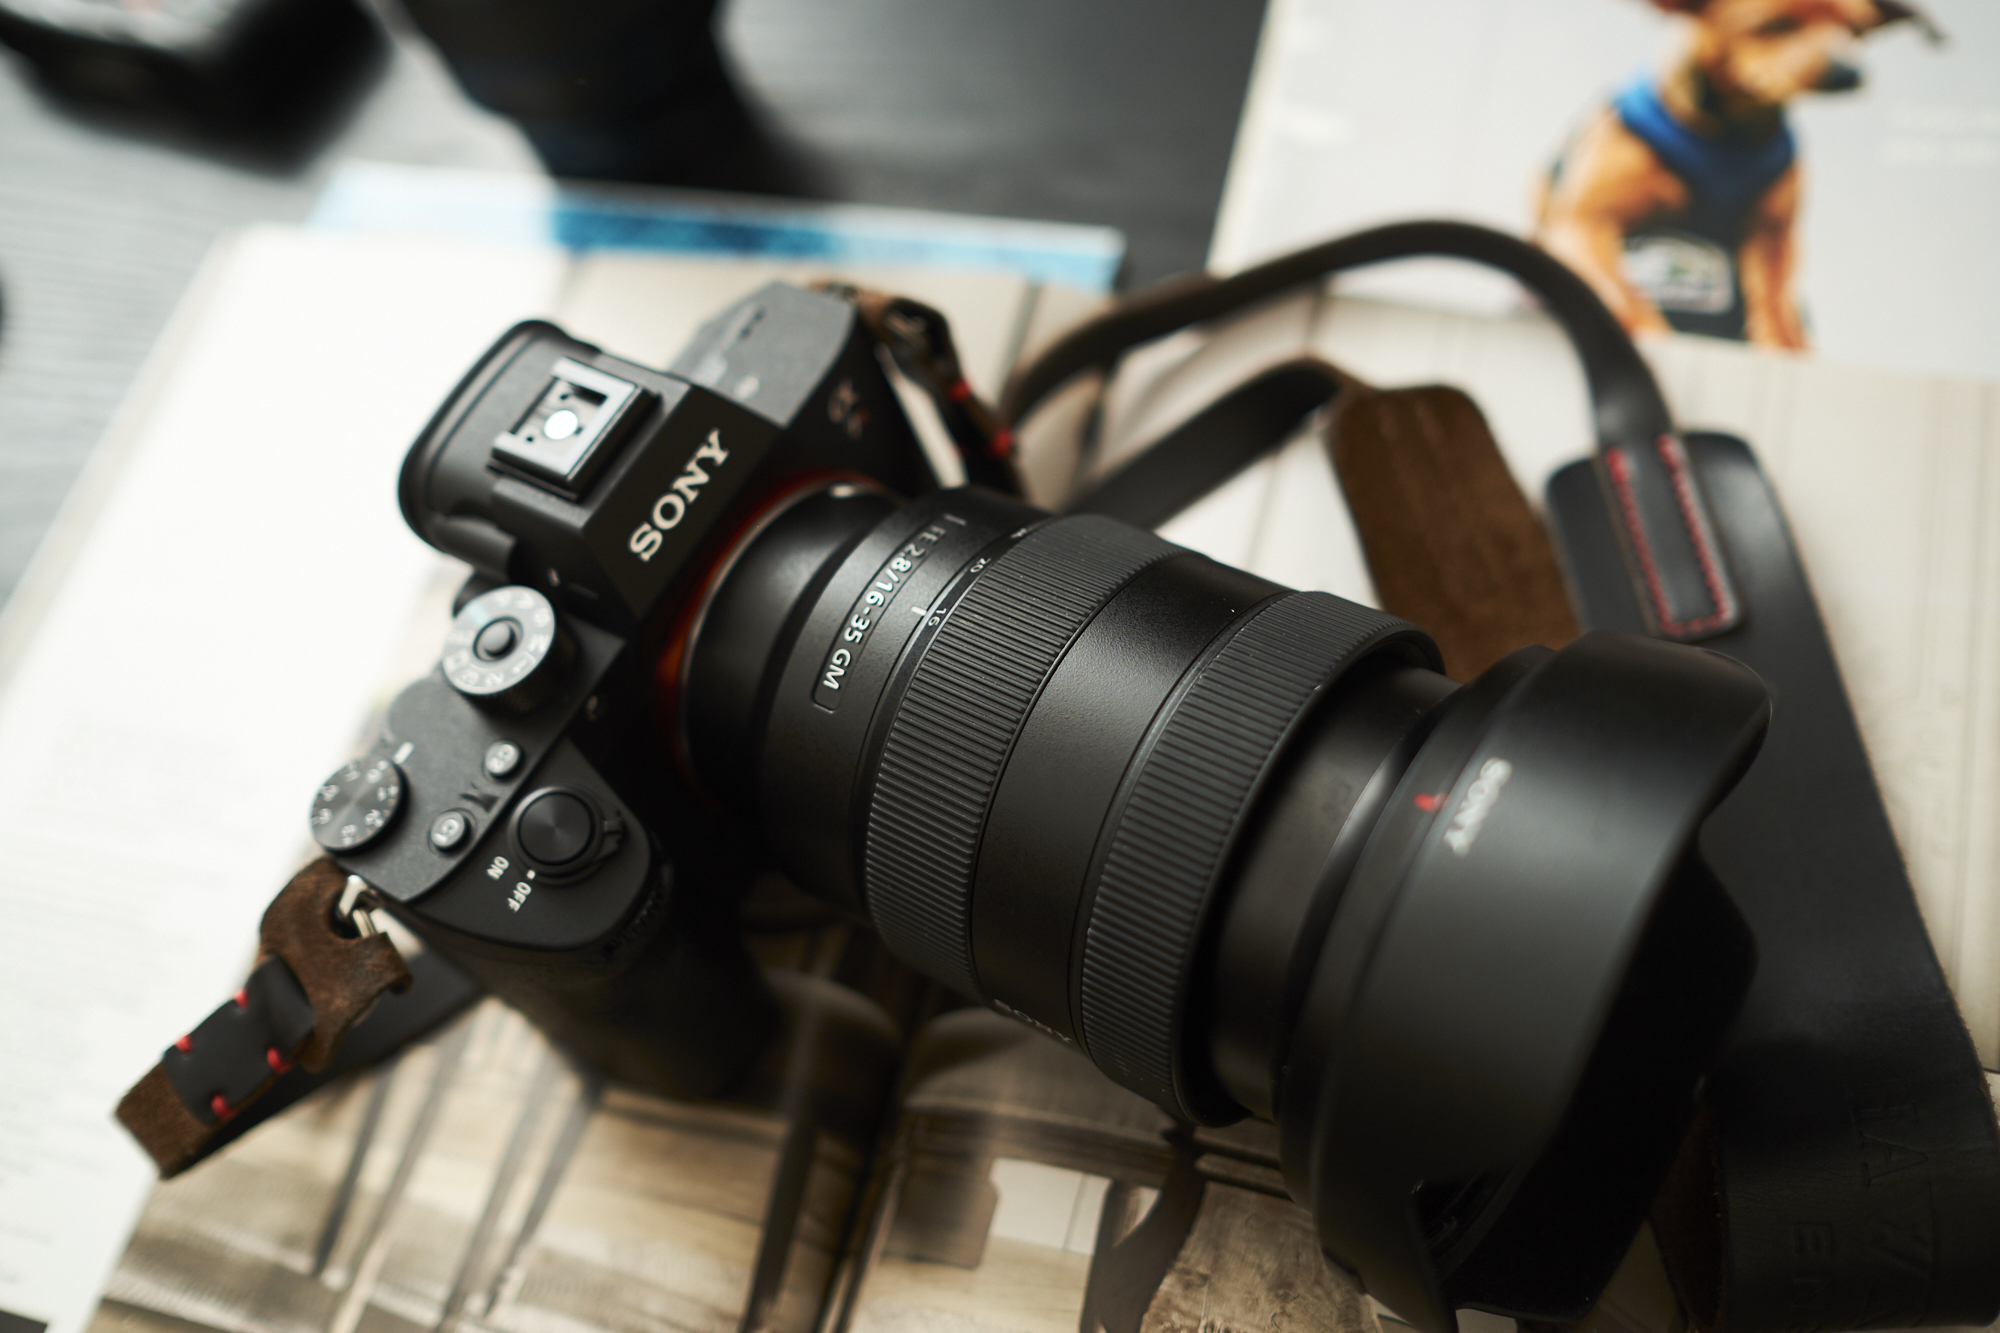 We’ve Updated Our Sony a7r III Review to Include Animal Eye AF Tests